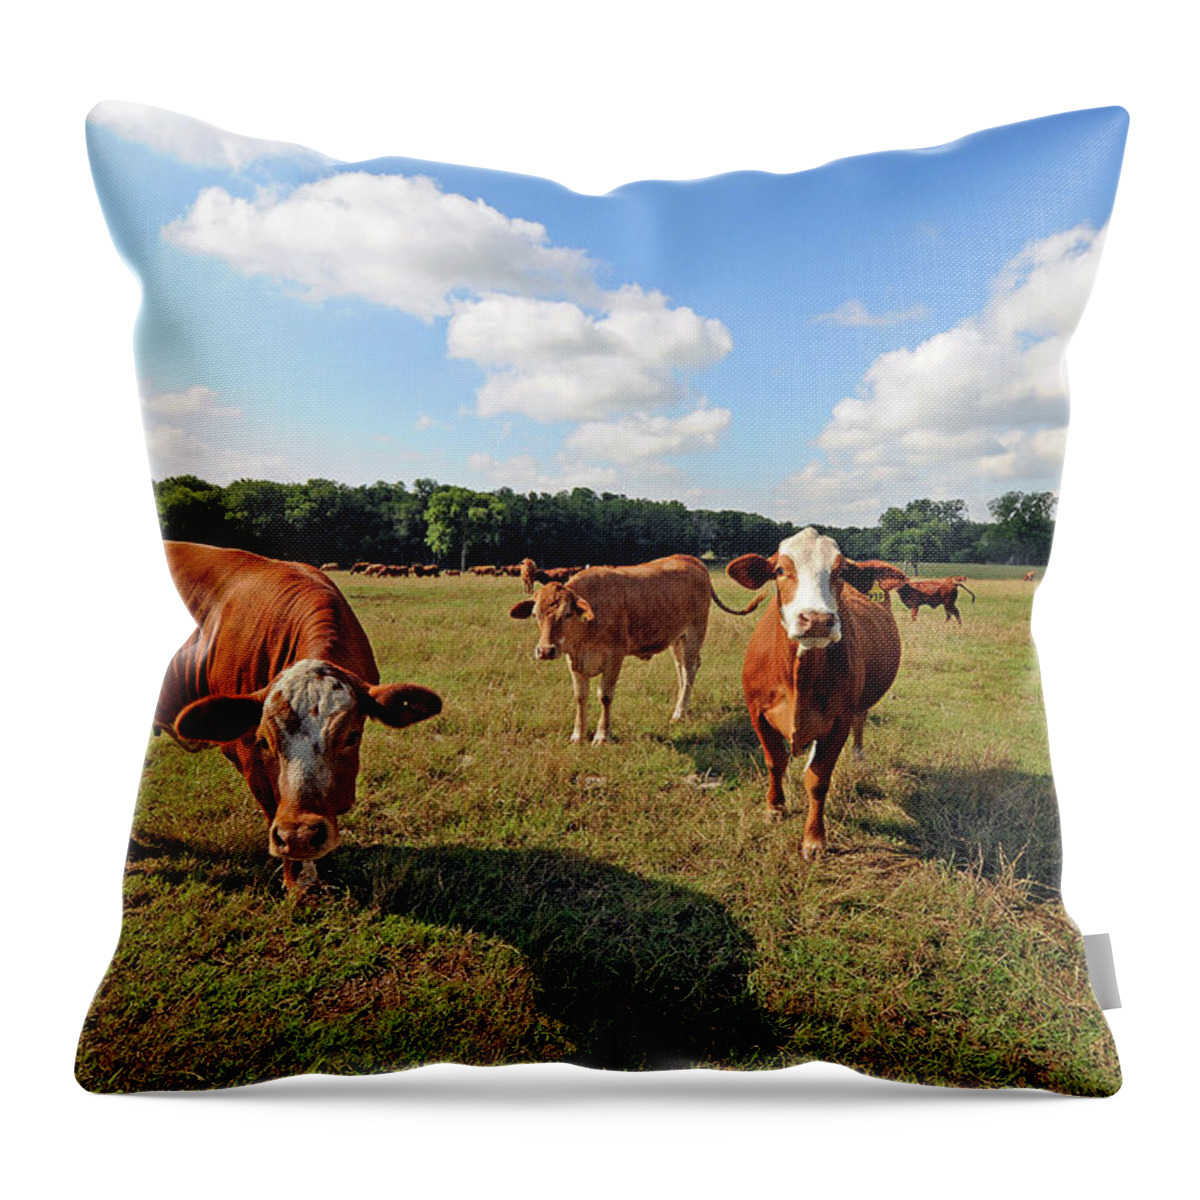 Inquisitive Throw Pillow featuring the photograph Inquisitive Cattle by Ted Keller